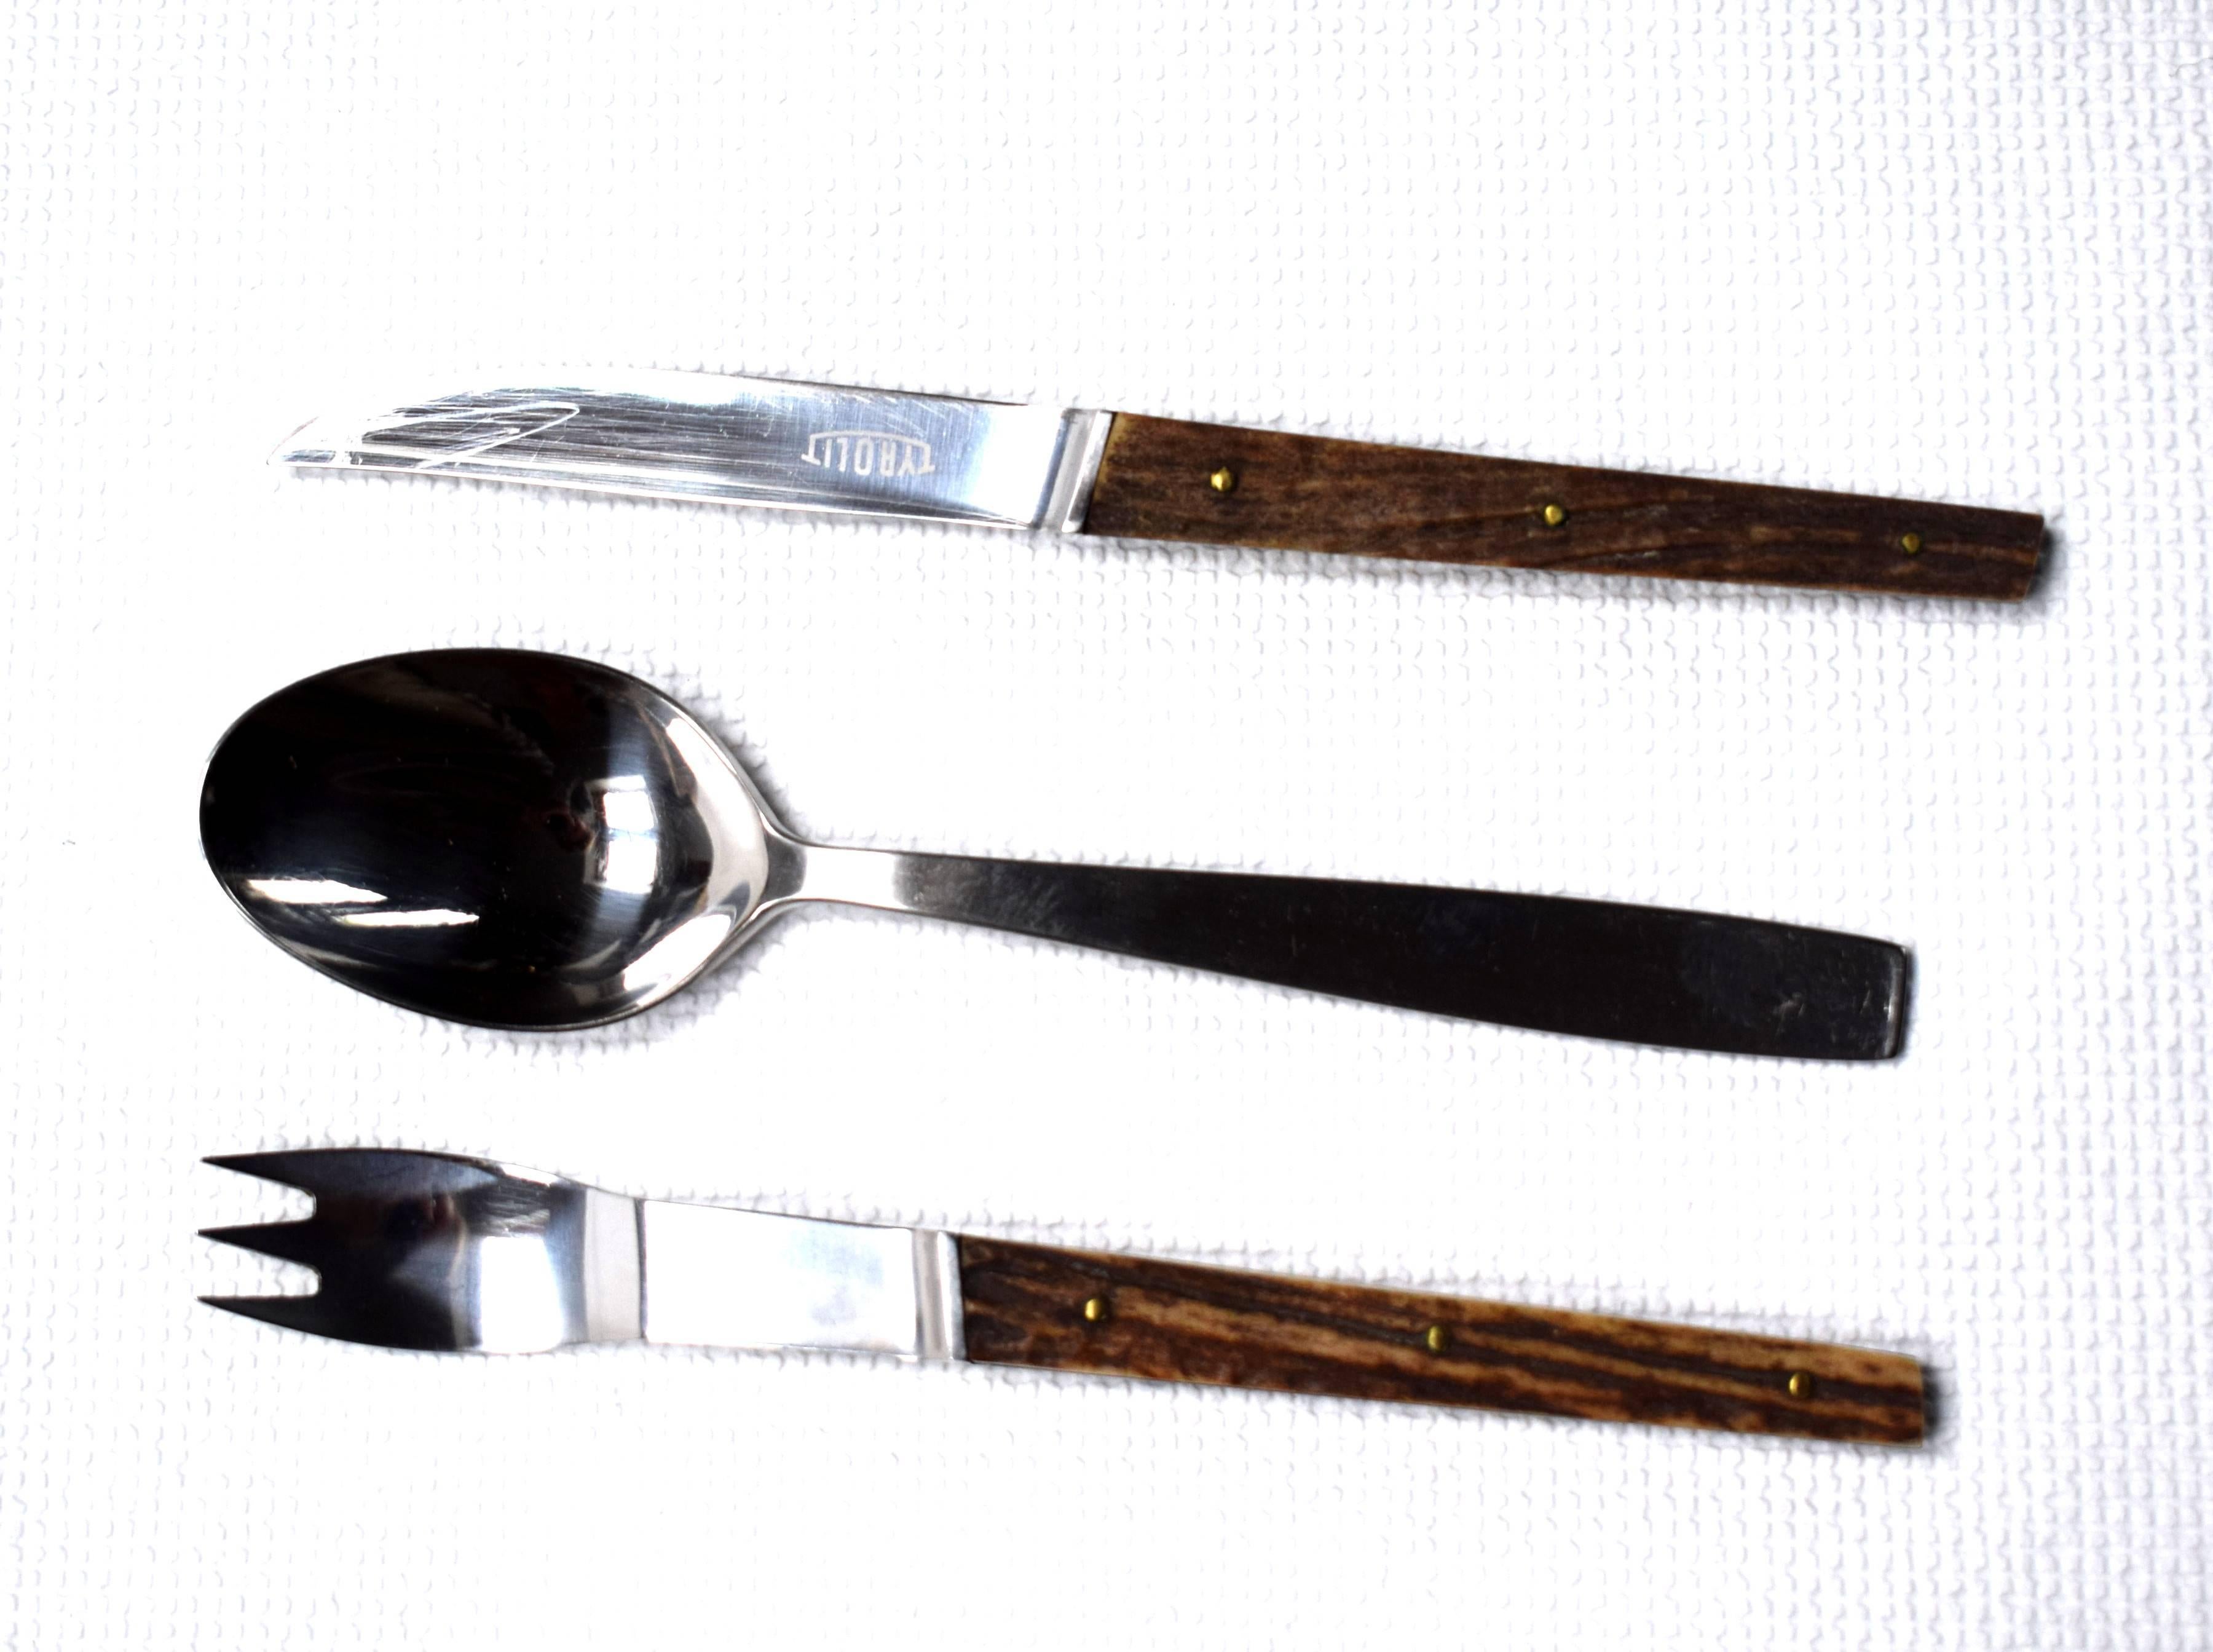 Cutlery in leather case.
Designed by Helmut Alder for Amboss Austria.
This in the simplicity very unusual Heurigen snack or cutlery in 1959 awarded the iF product design award.
High-quality version with handles made of antlers.
Very rare.